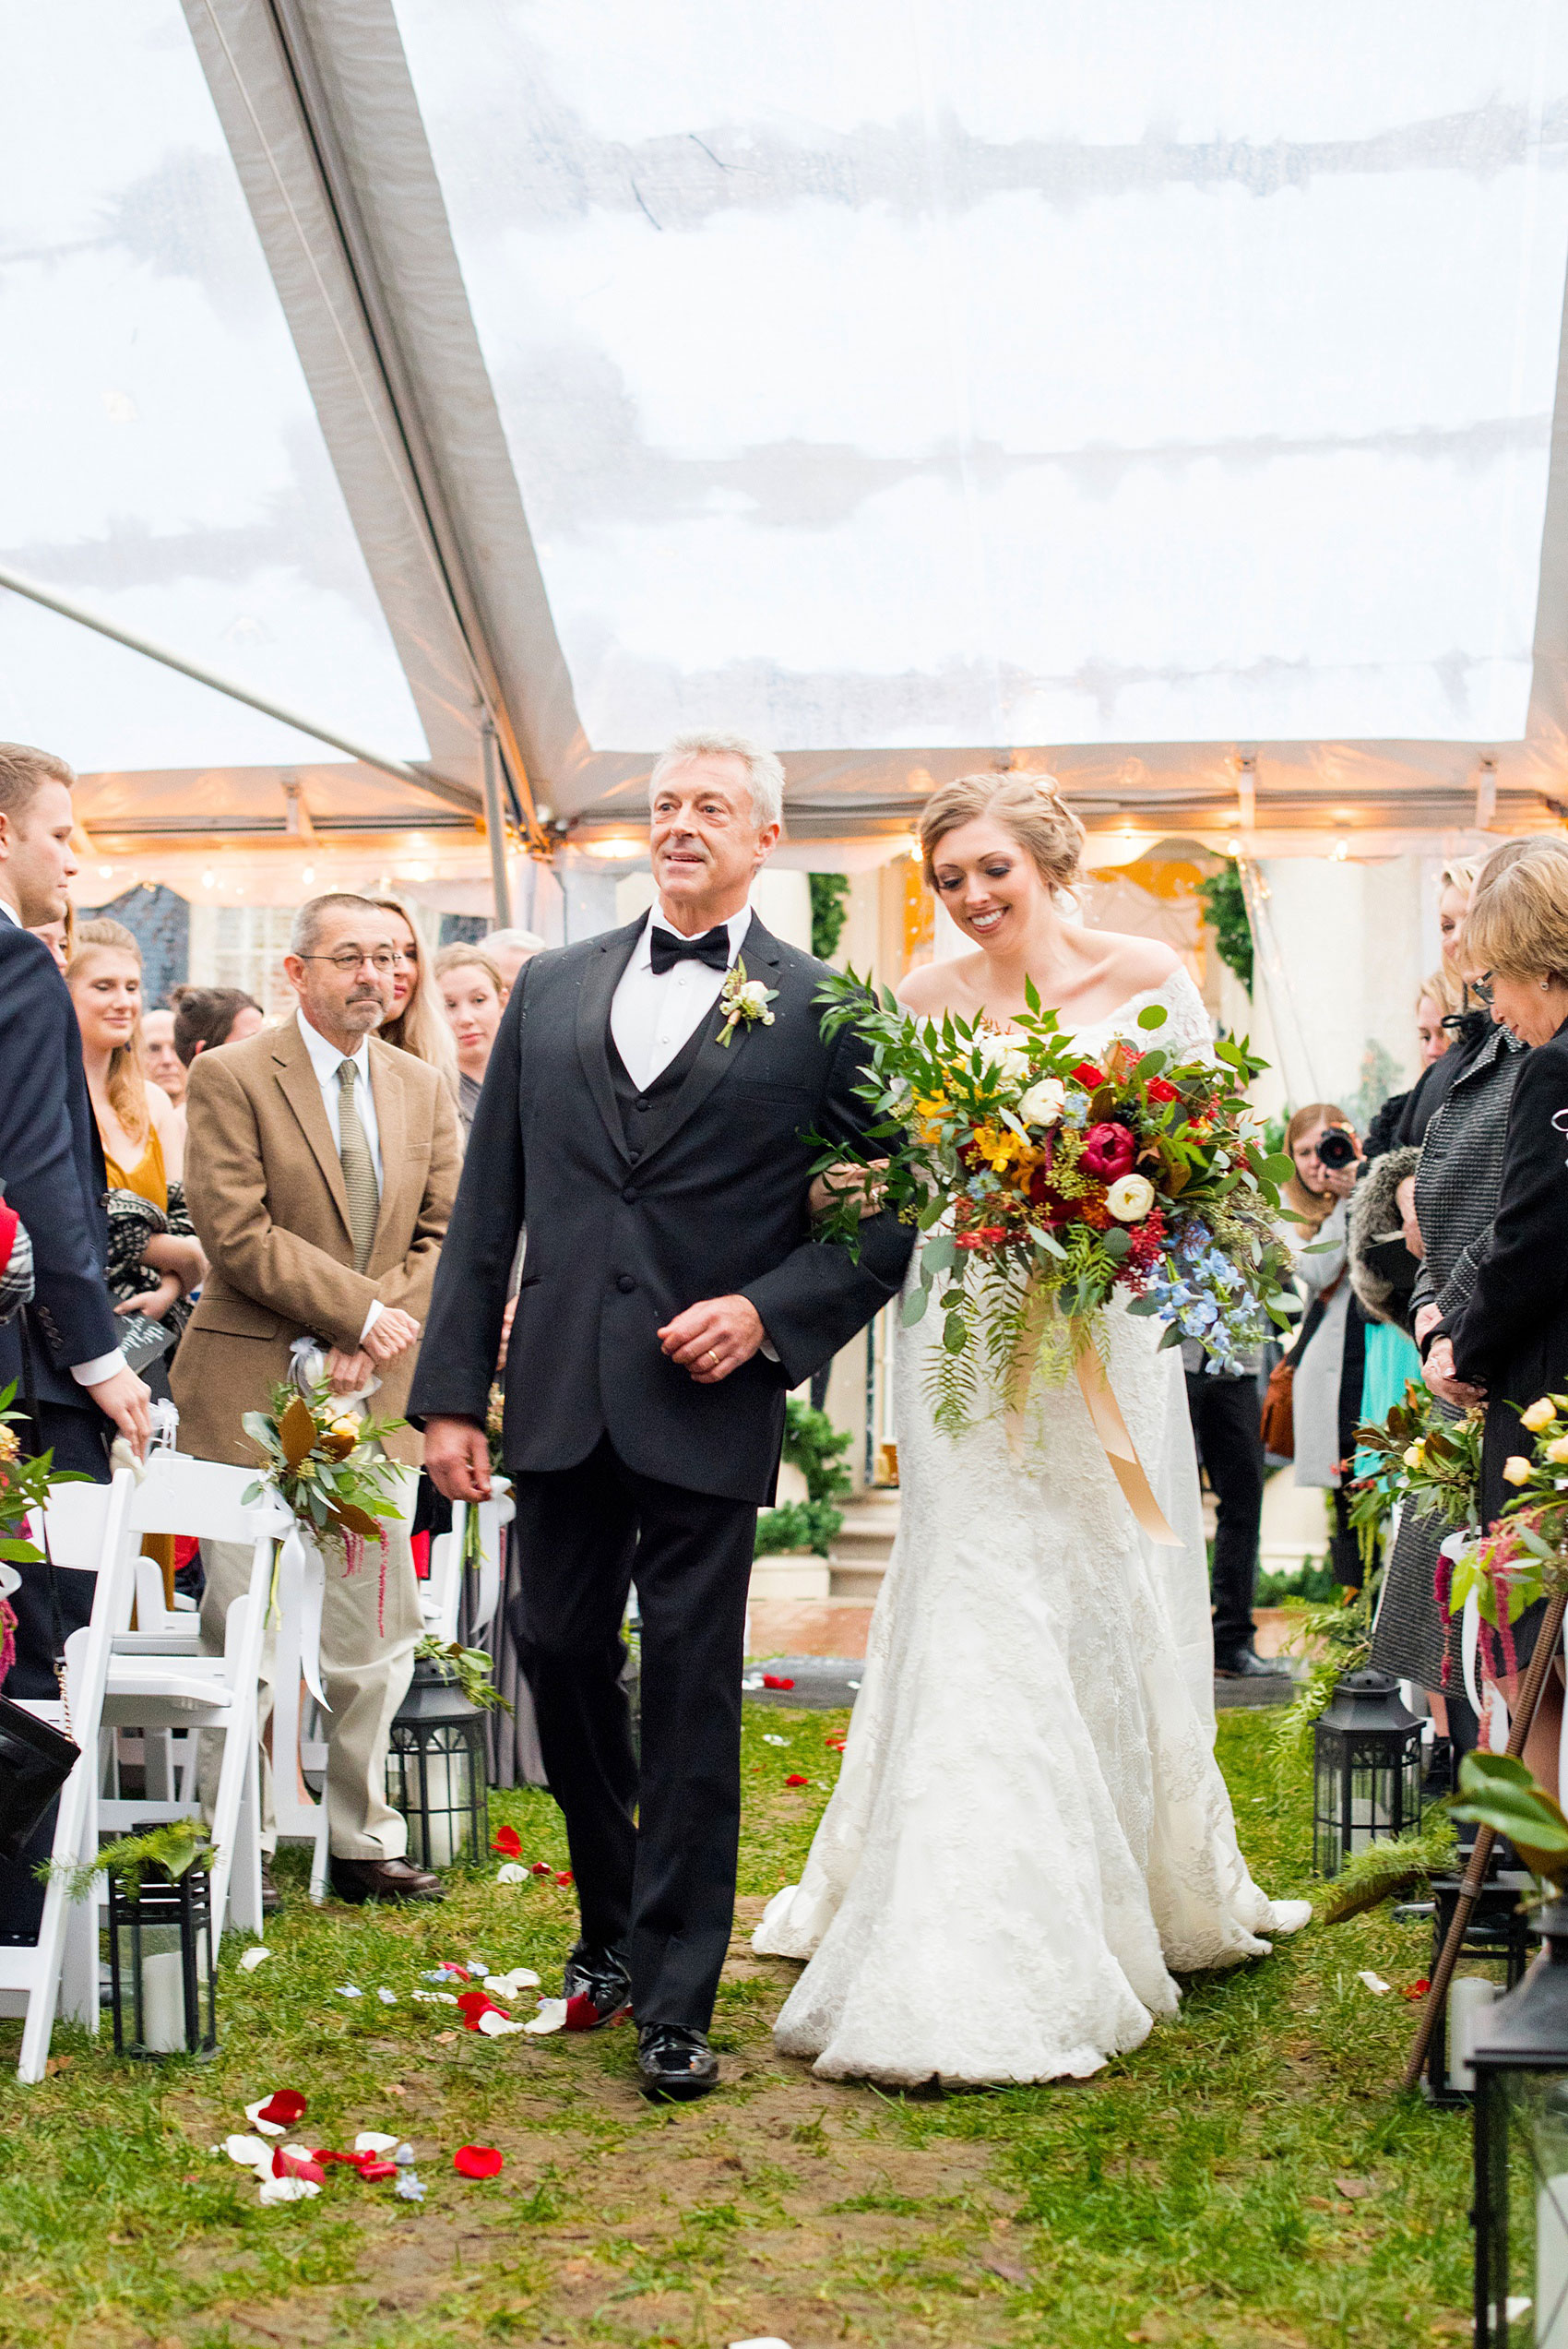 Beautiful wedding photos at The Carolina Inn at Chapel Hill, North Carolina by Mikkel Paige Photography. Ceremony photo of the bride walking down the aisle with her father under a clear tent. Planning by McLean Events. Click through to see the rest of this gorgeous winter wedding! #thecarolinainn #snowywedding